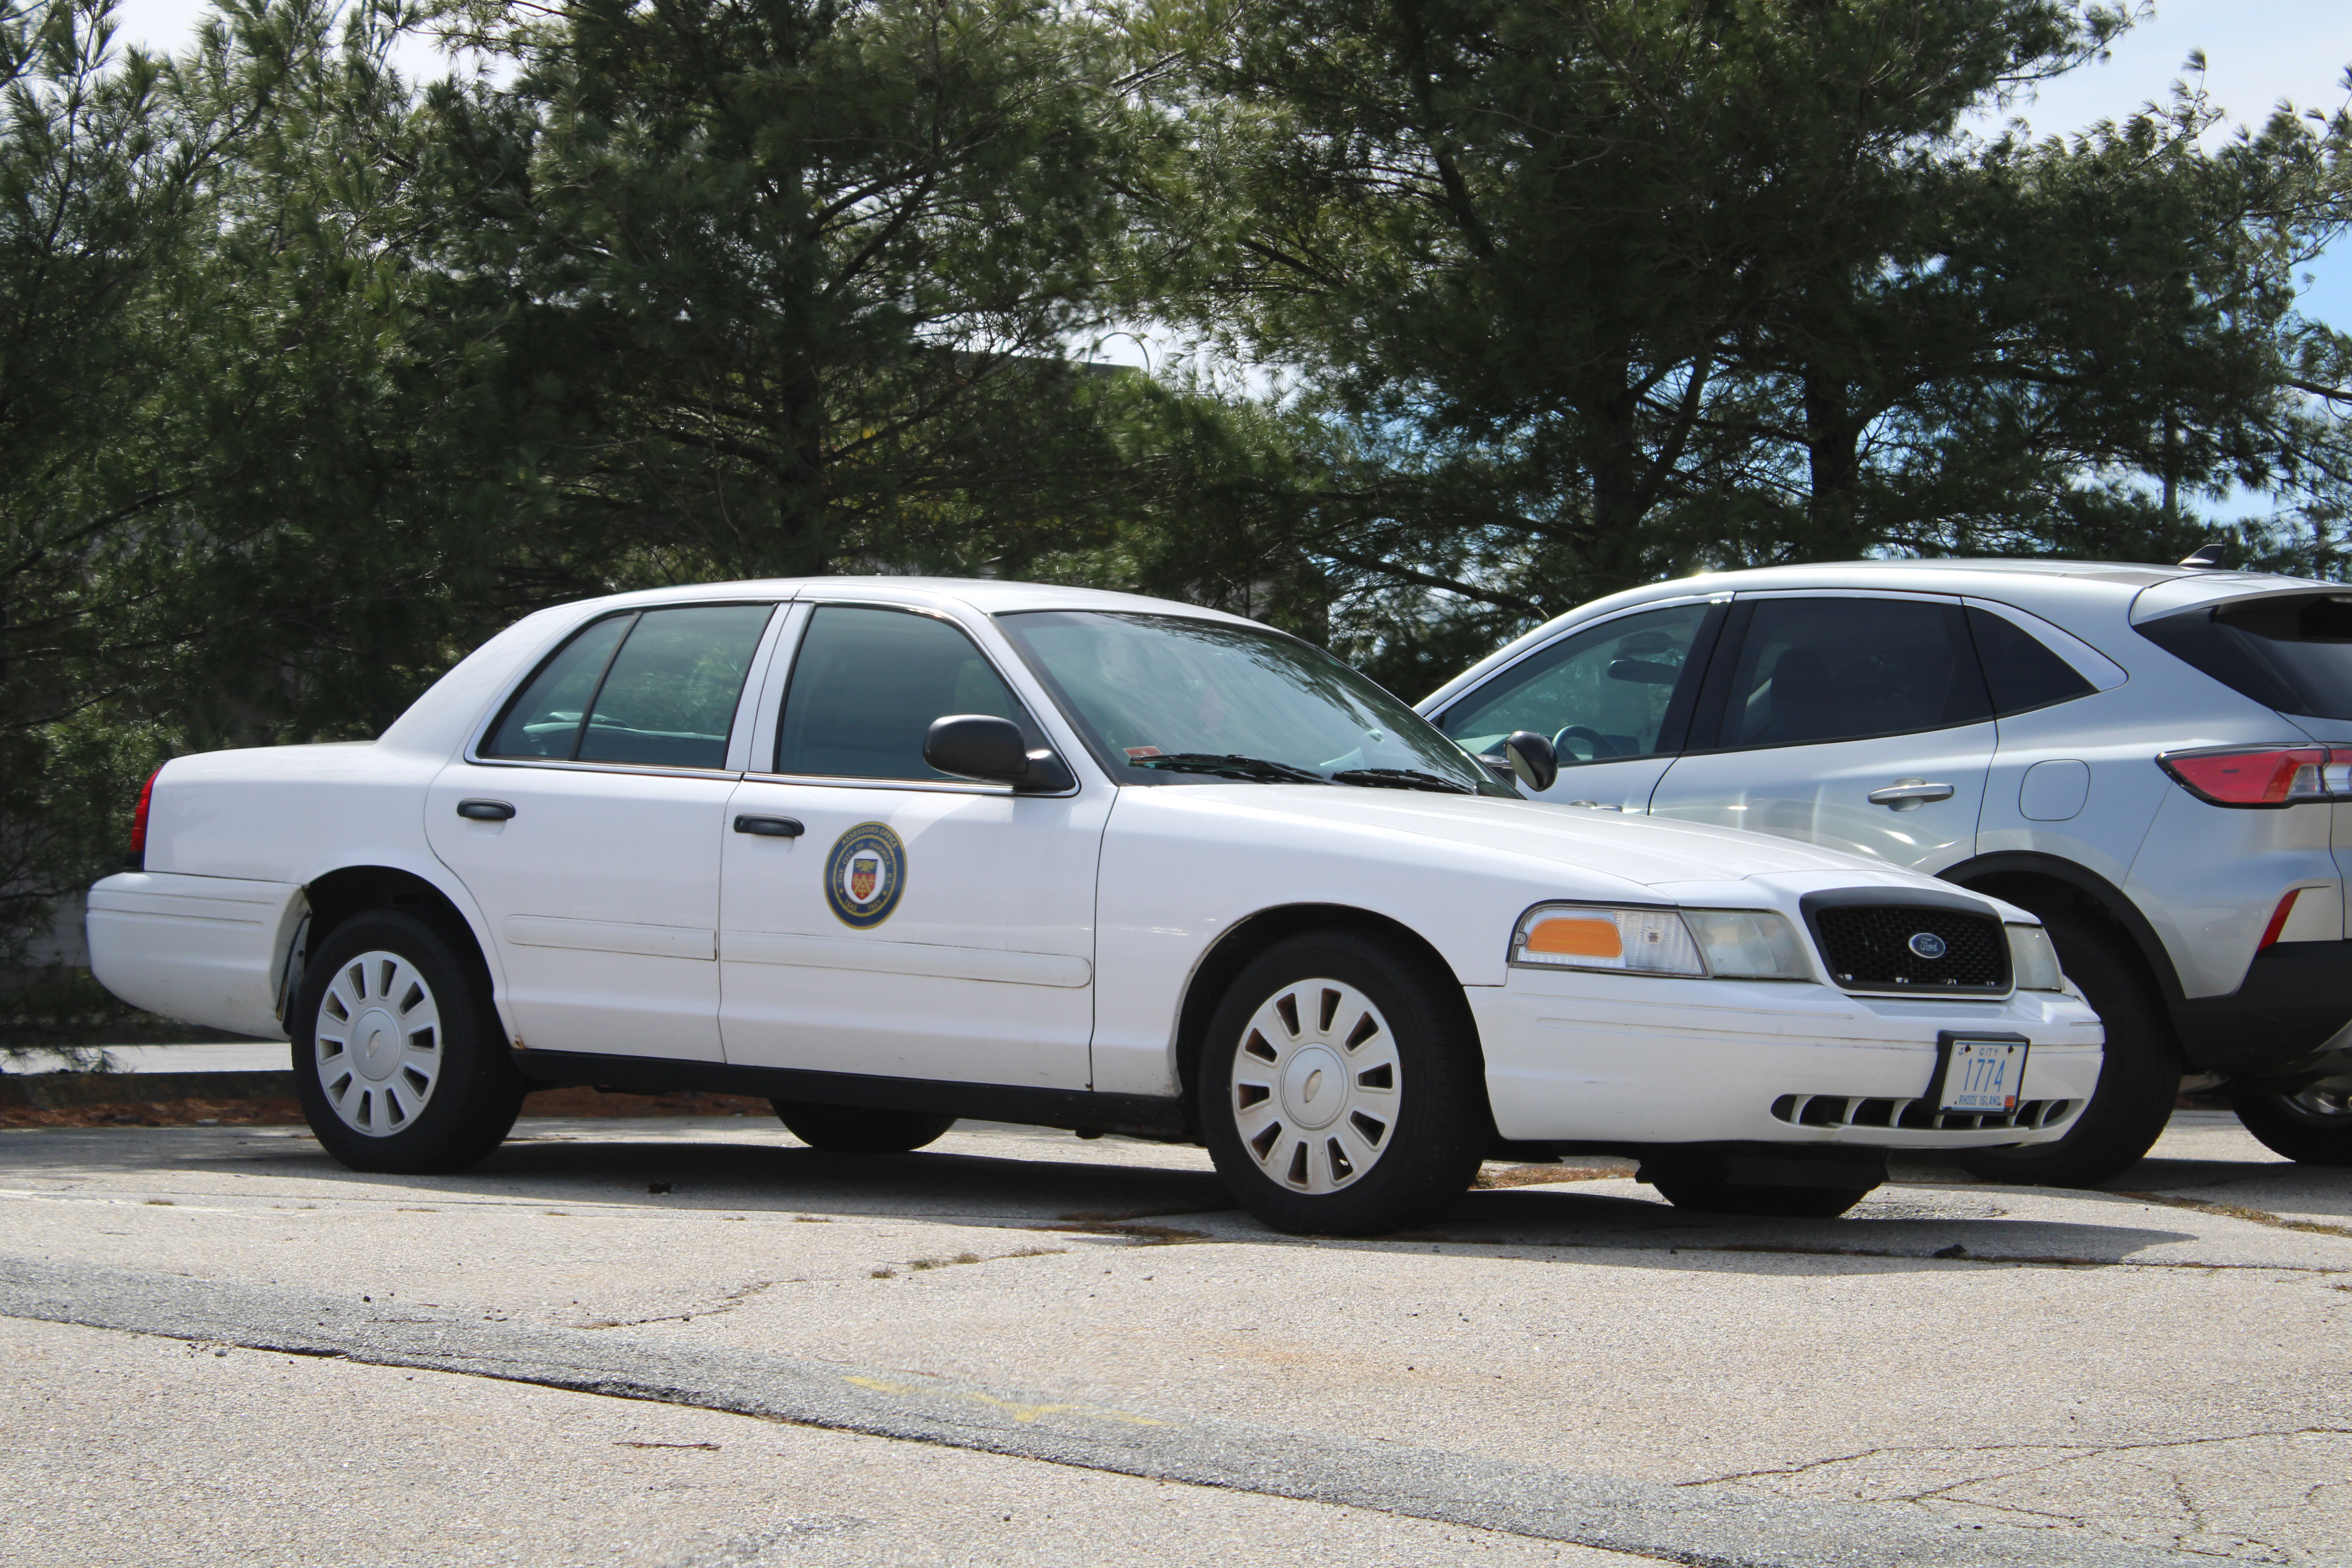 A photo  of Warwick Public Works
            Car 1774, a 2006-2008 Ford Crown Victoria Police Interceptor             taken by @riemergencyvehicles